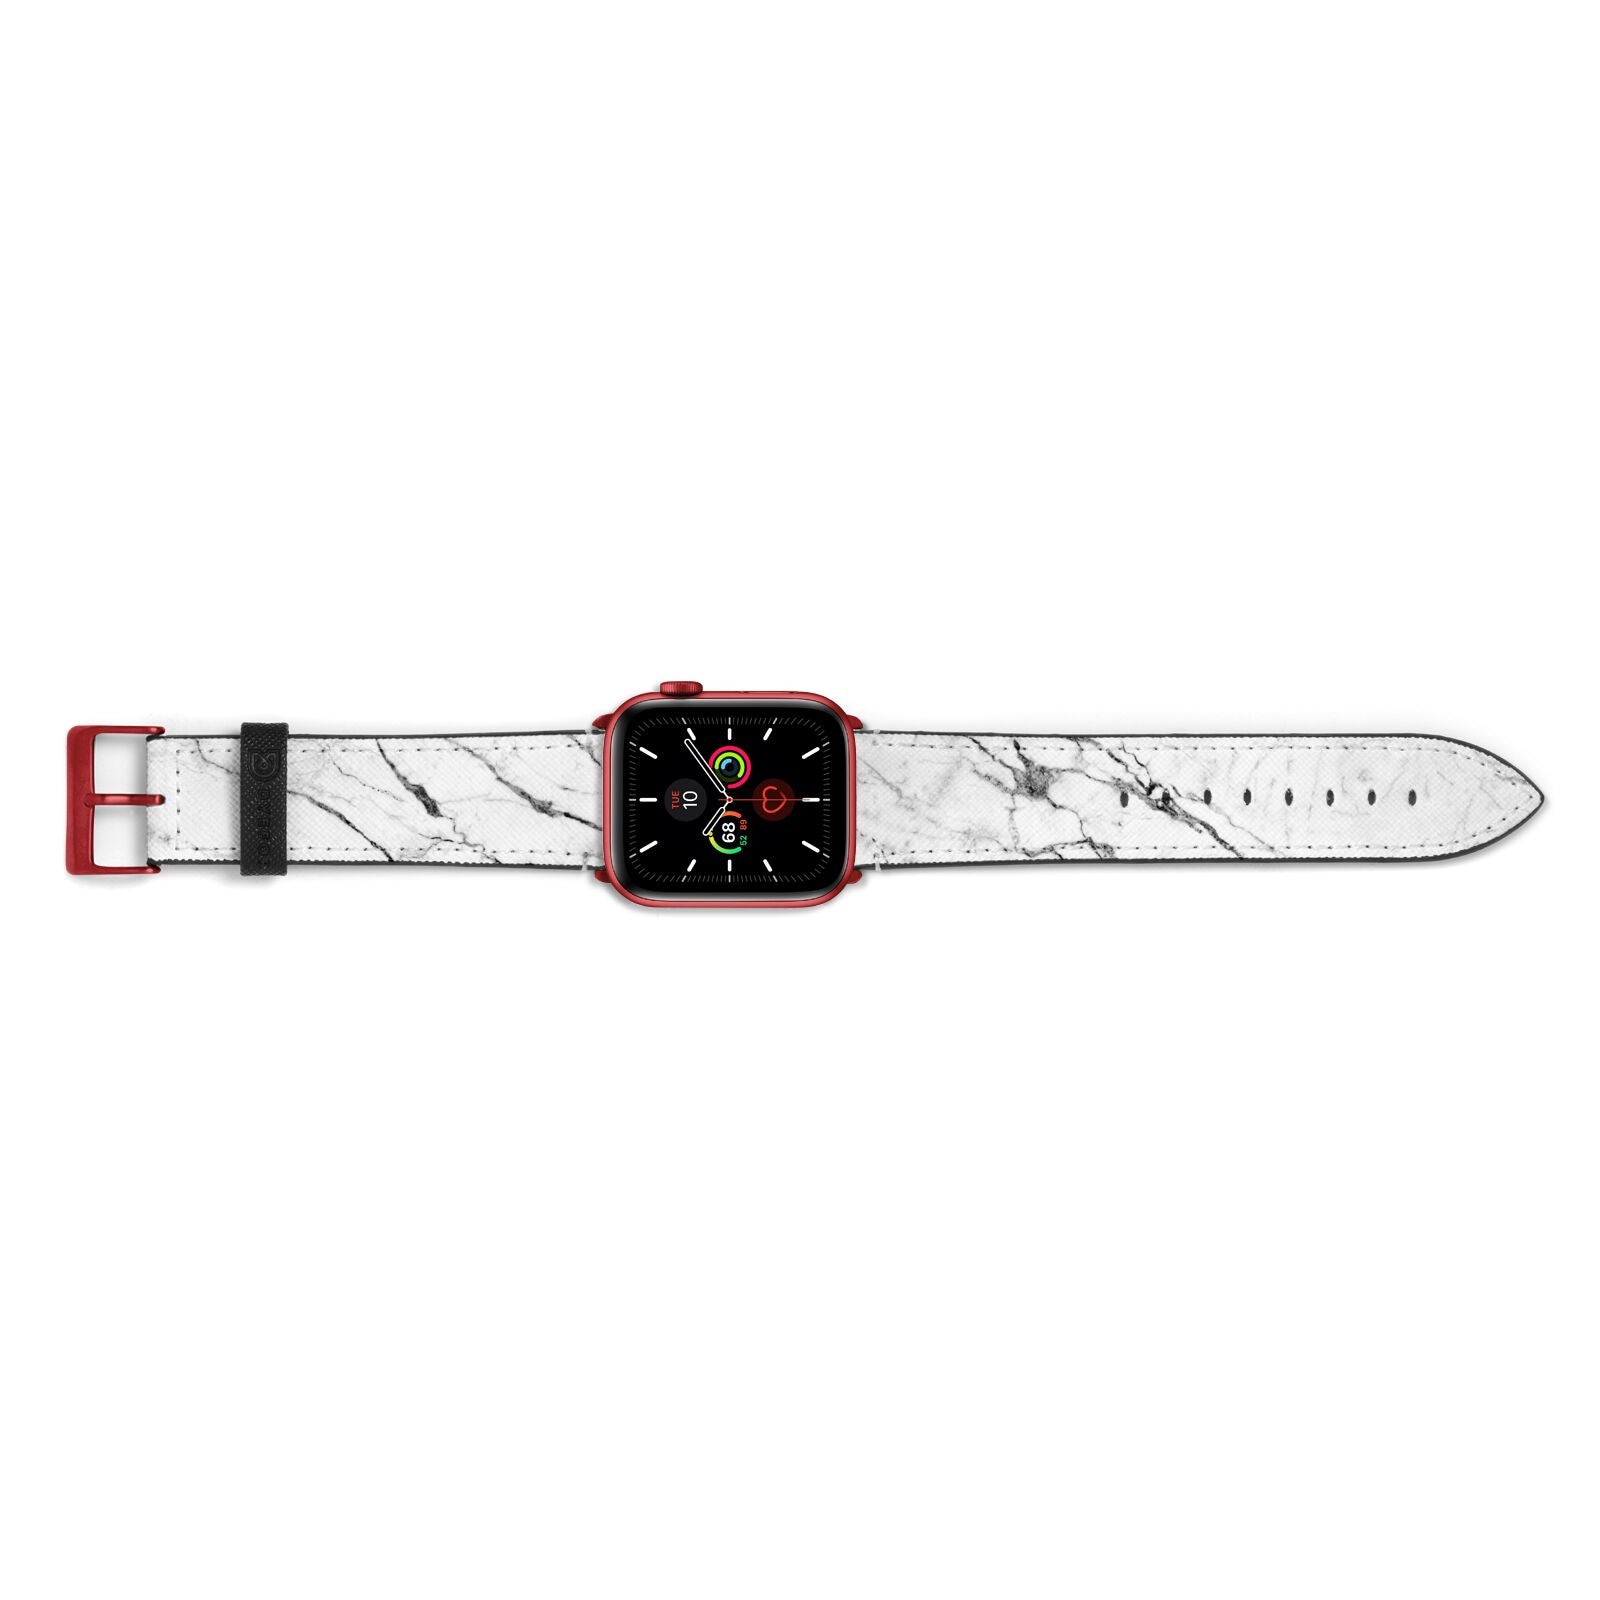 Marble White Apple Watch Strap Landscape Image Red Hardware